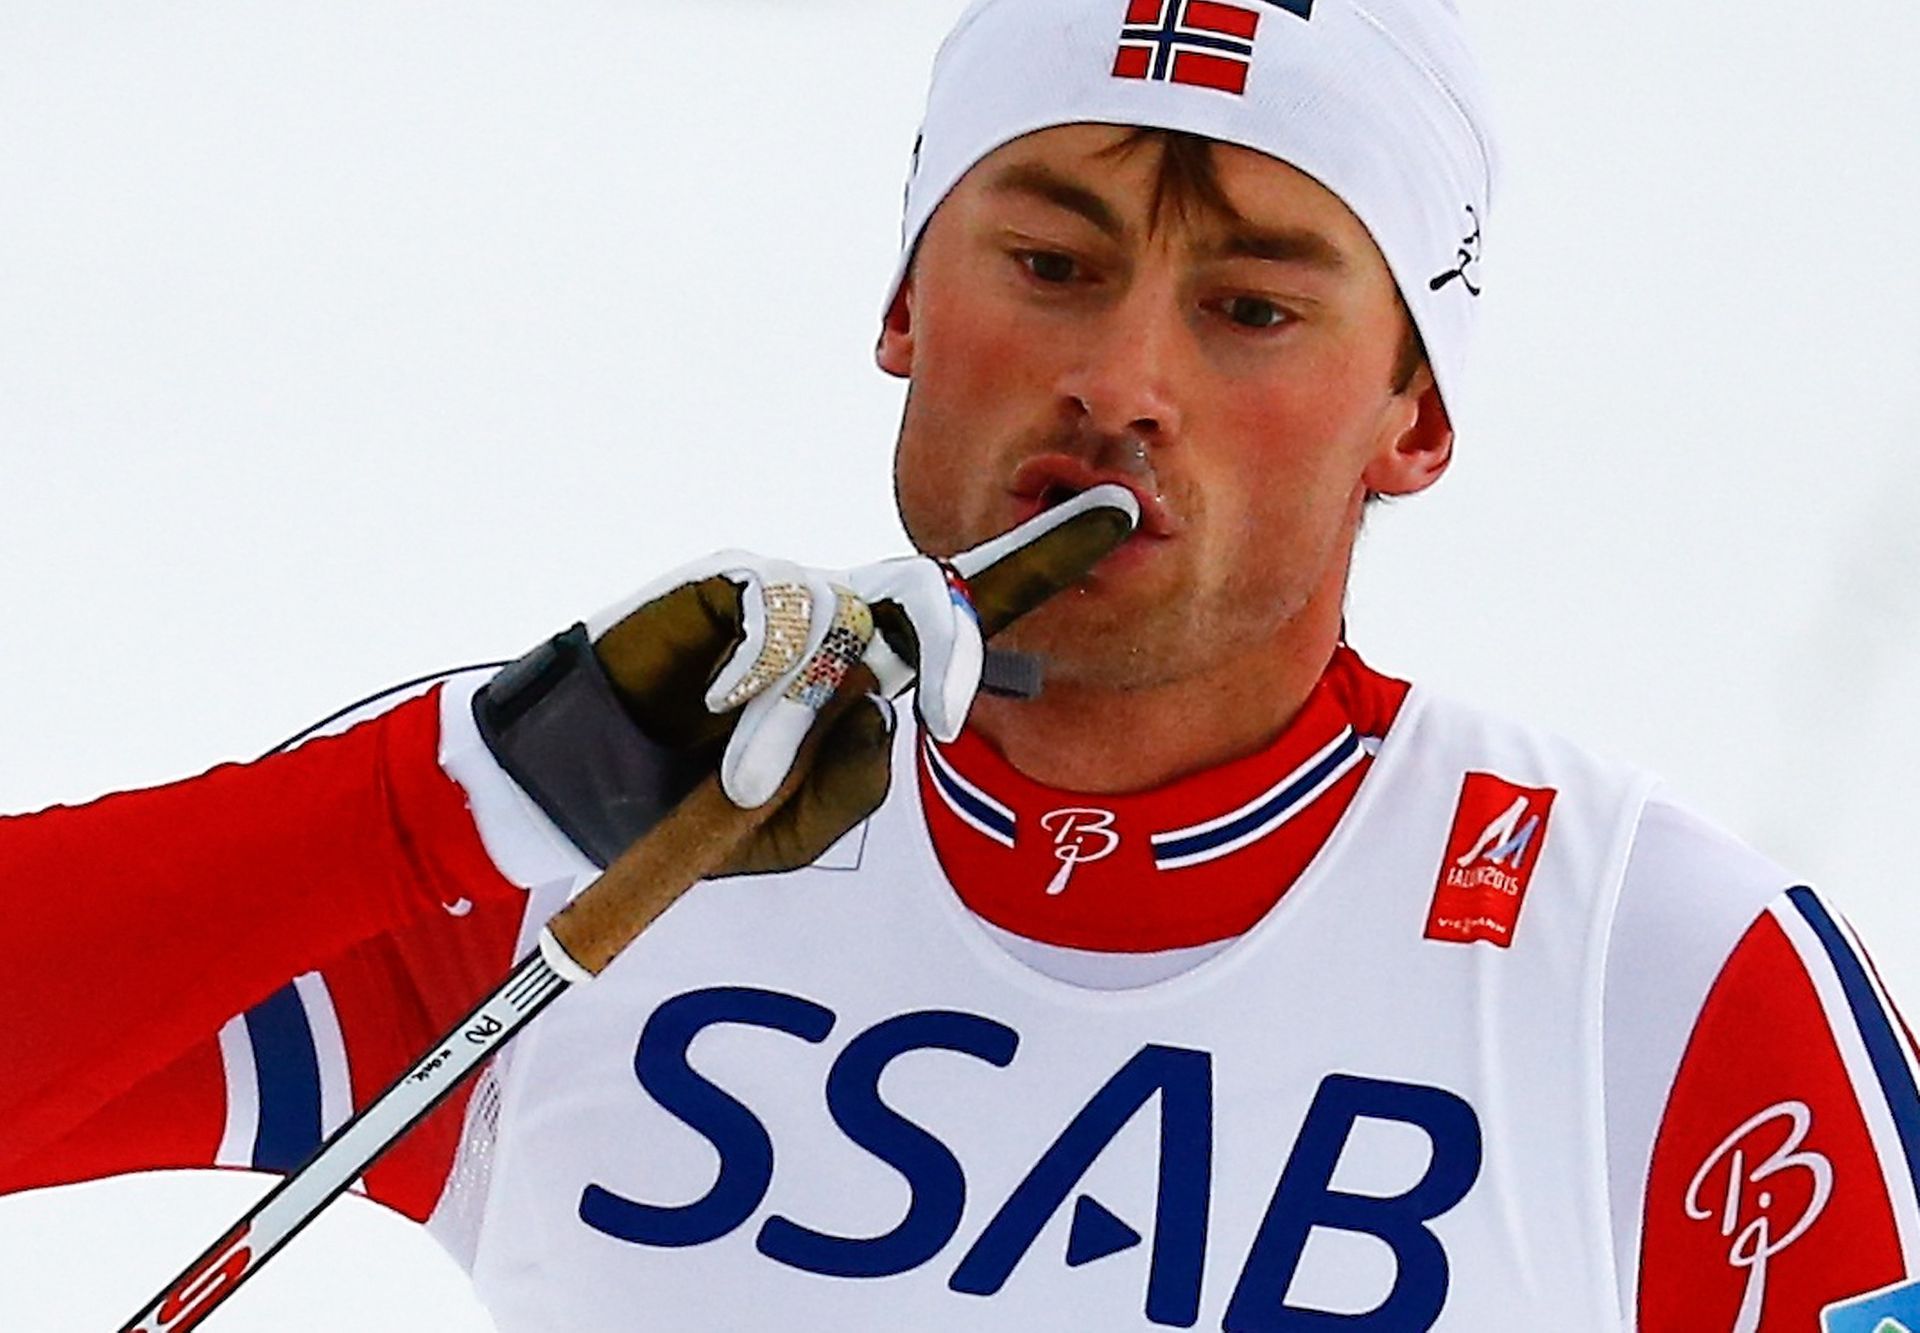 Norway's Northug crosses the finish line ahead of Sweden's Halfvarsson to win the men's cross country free/classic 4 x 10 km relay final at the Nordic World Ski Championships in Falun